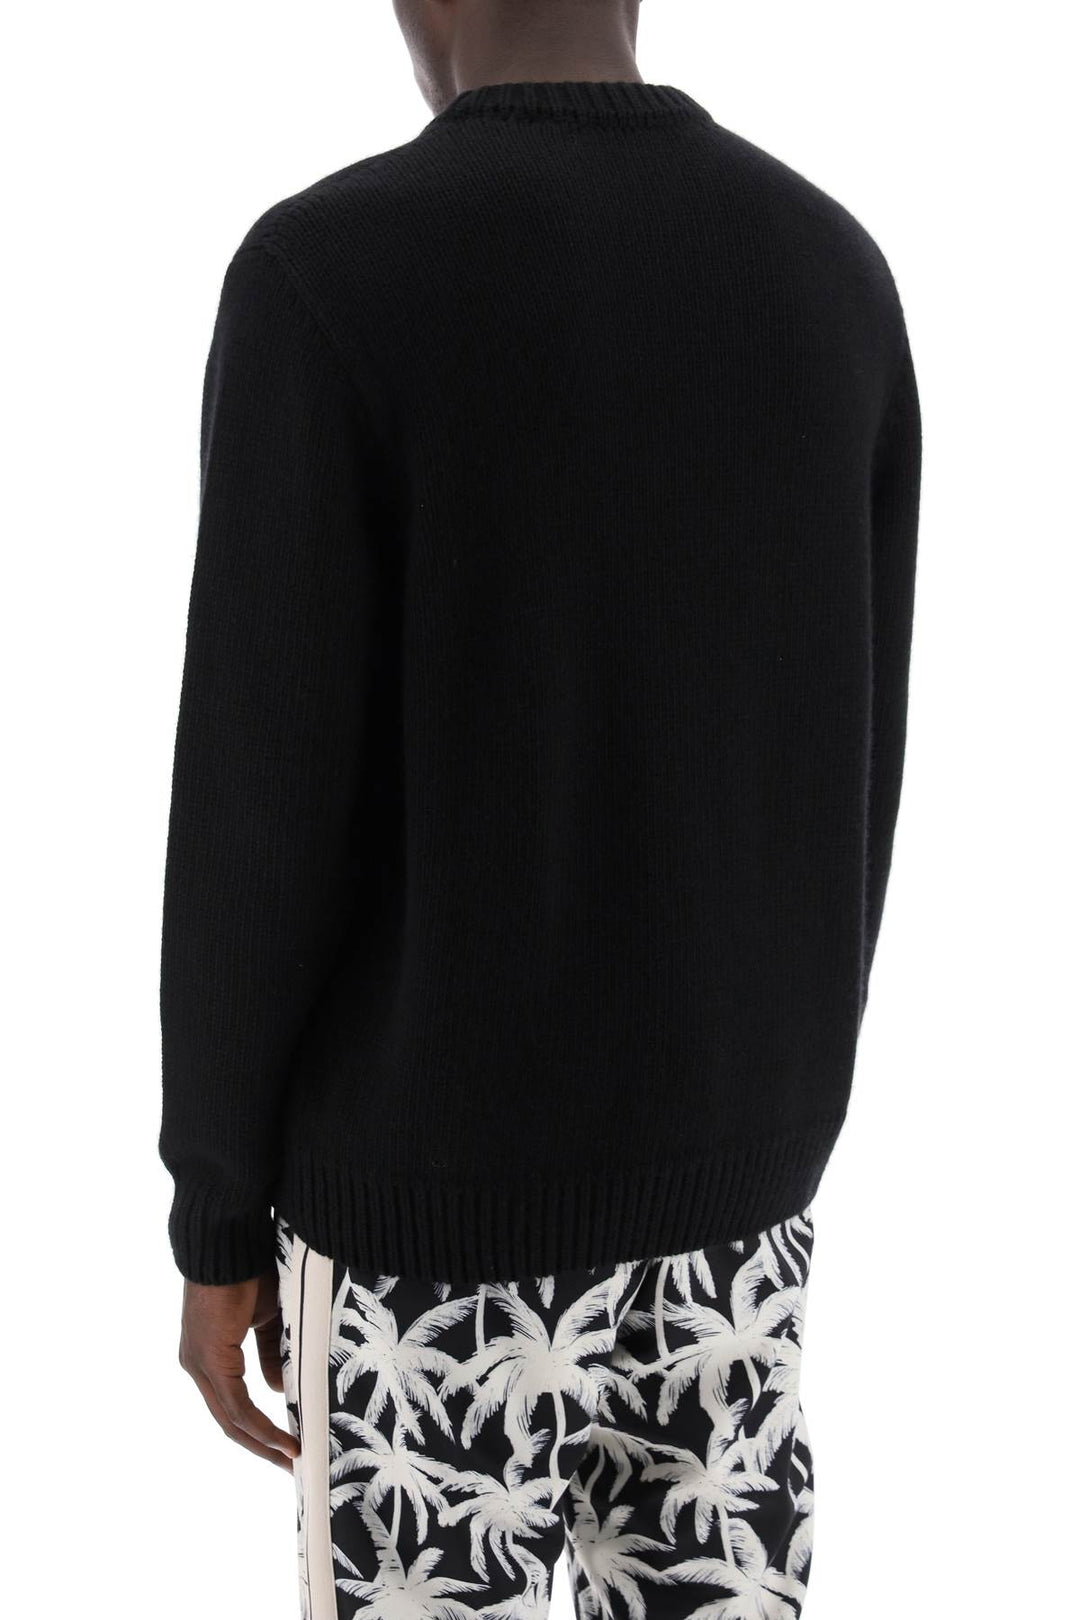 Palm Angels Milan Pullover With Mini Embroidered Studs  Black